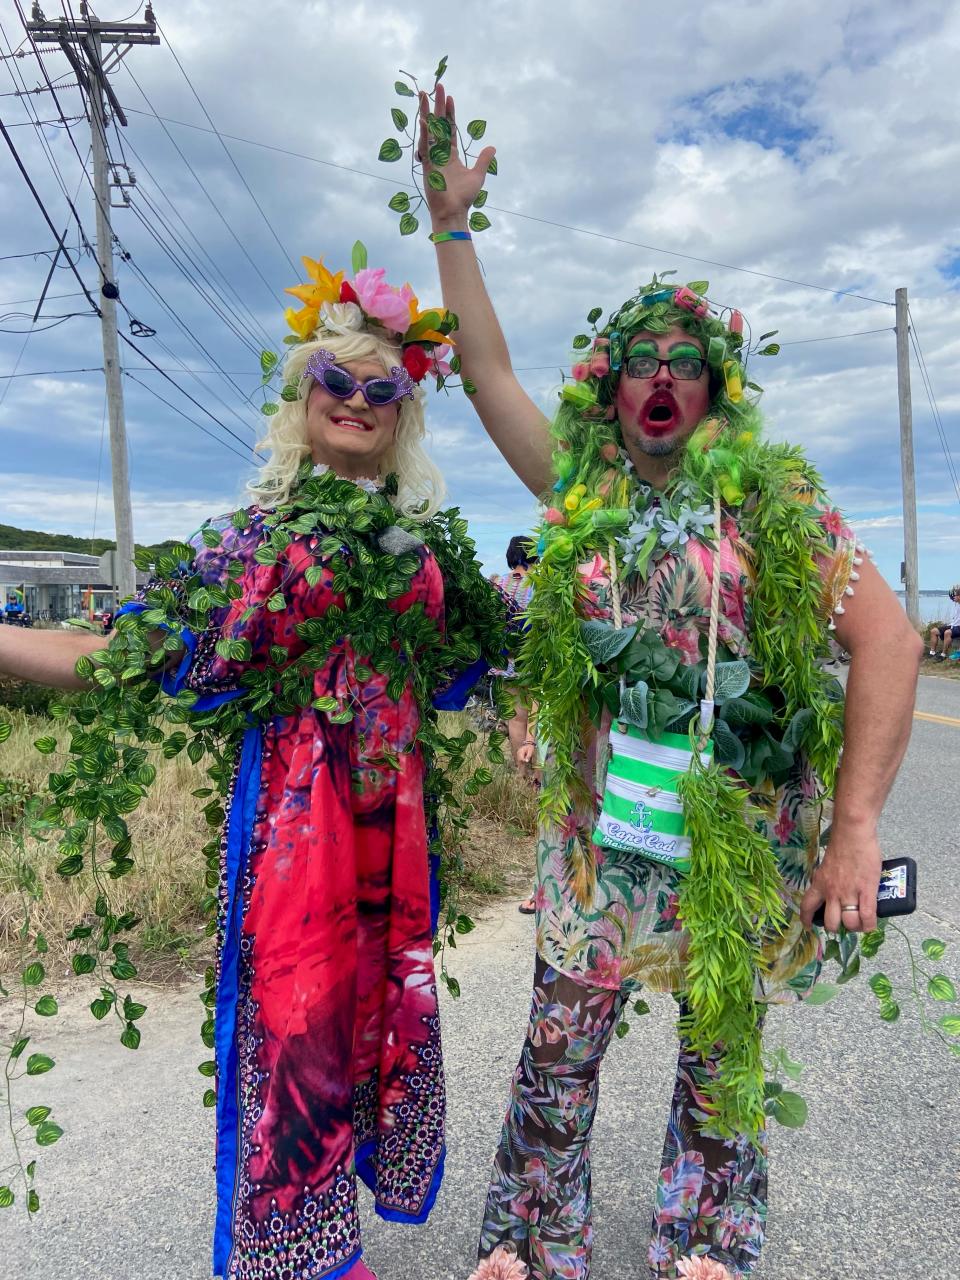 Andy Fagan (left) and Joe Hawk (right) dressed as "Mother Nature" at the Provincetown Carnival parade this year. They were standing on Commercial Street waiting to see the parade start on Thursday around 3 p.m. Fagan and Hawk have been coming to Carnival for about 10 years from their home in New York.